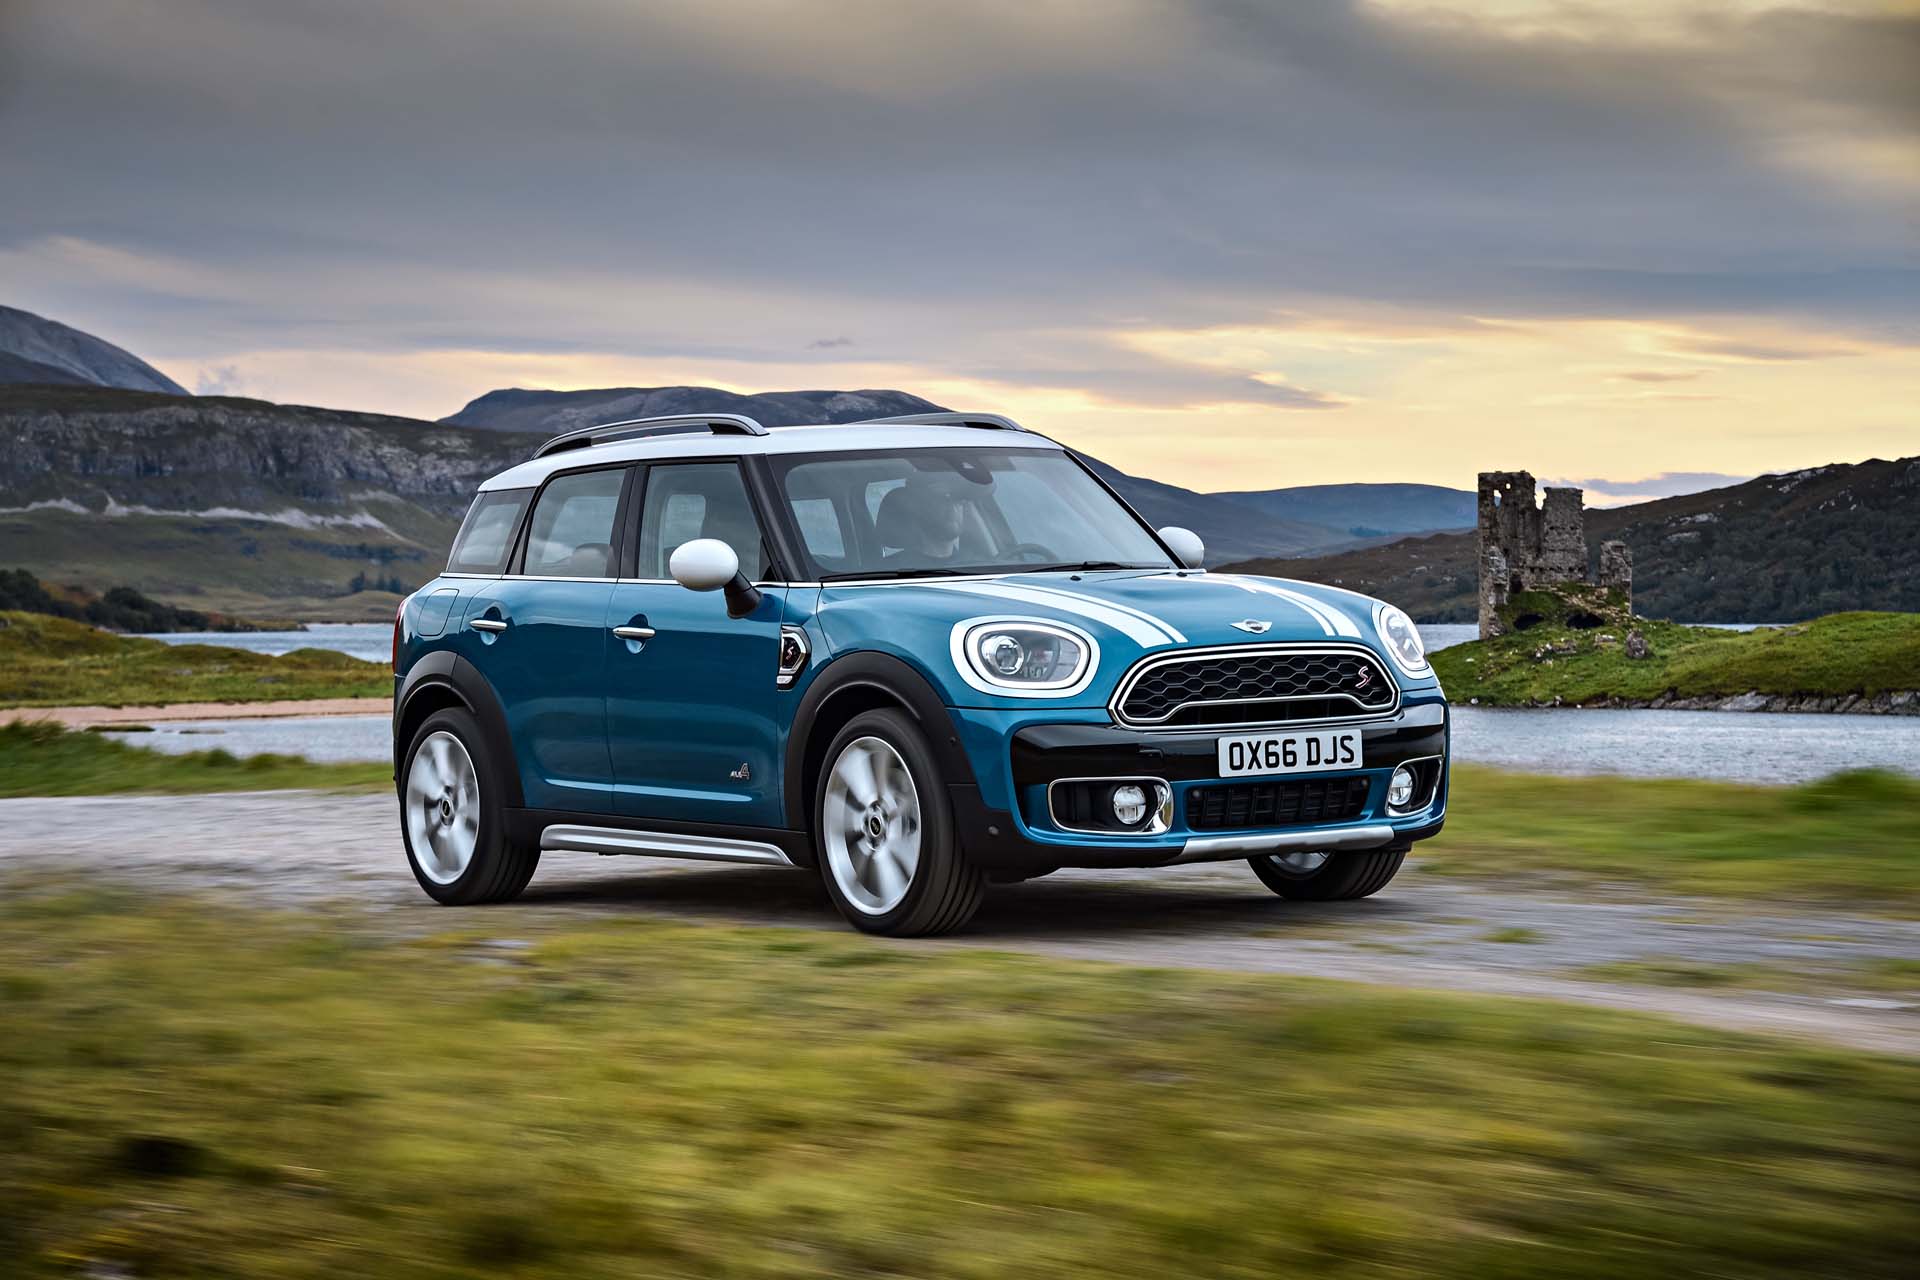 2019 MINI Cooper Countryman Summary Review - The Car Connection